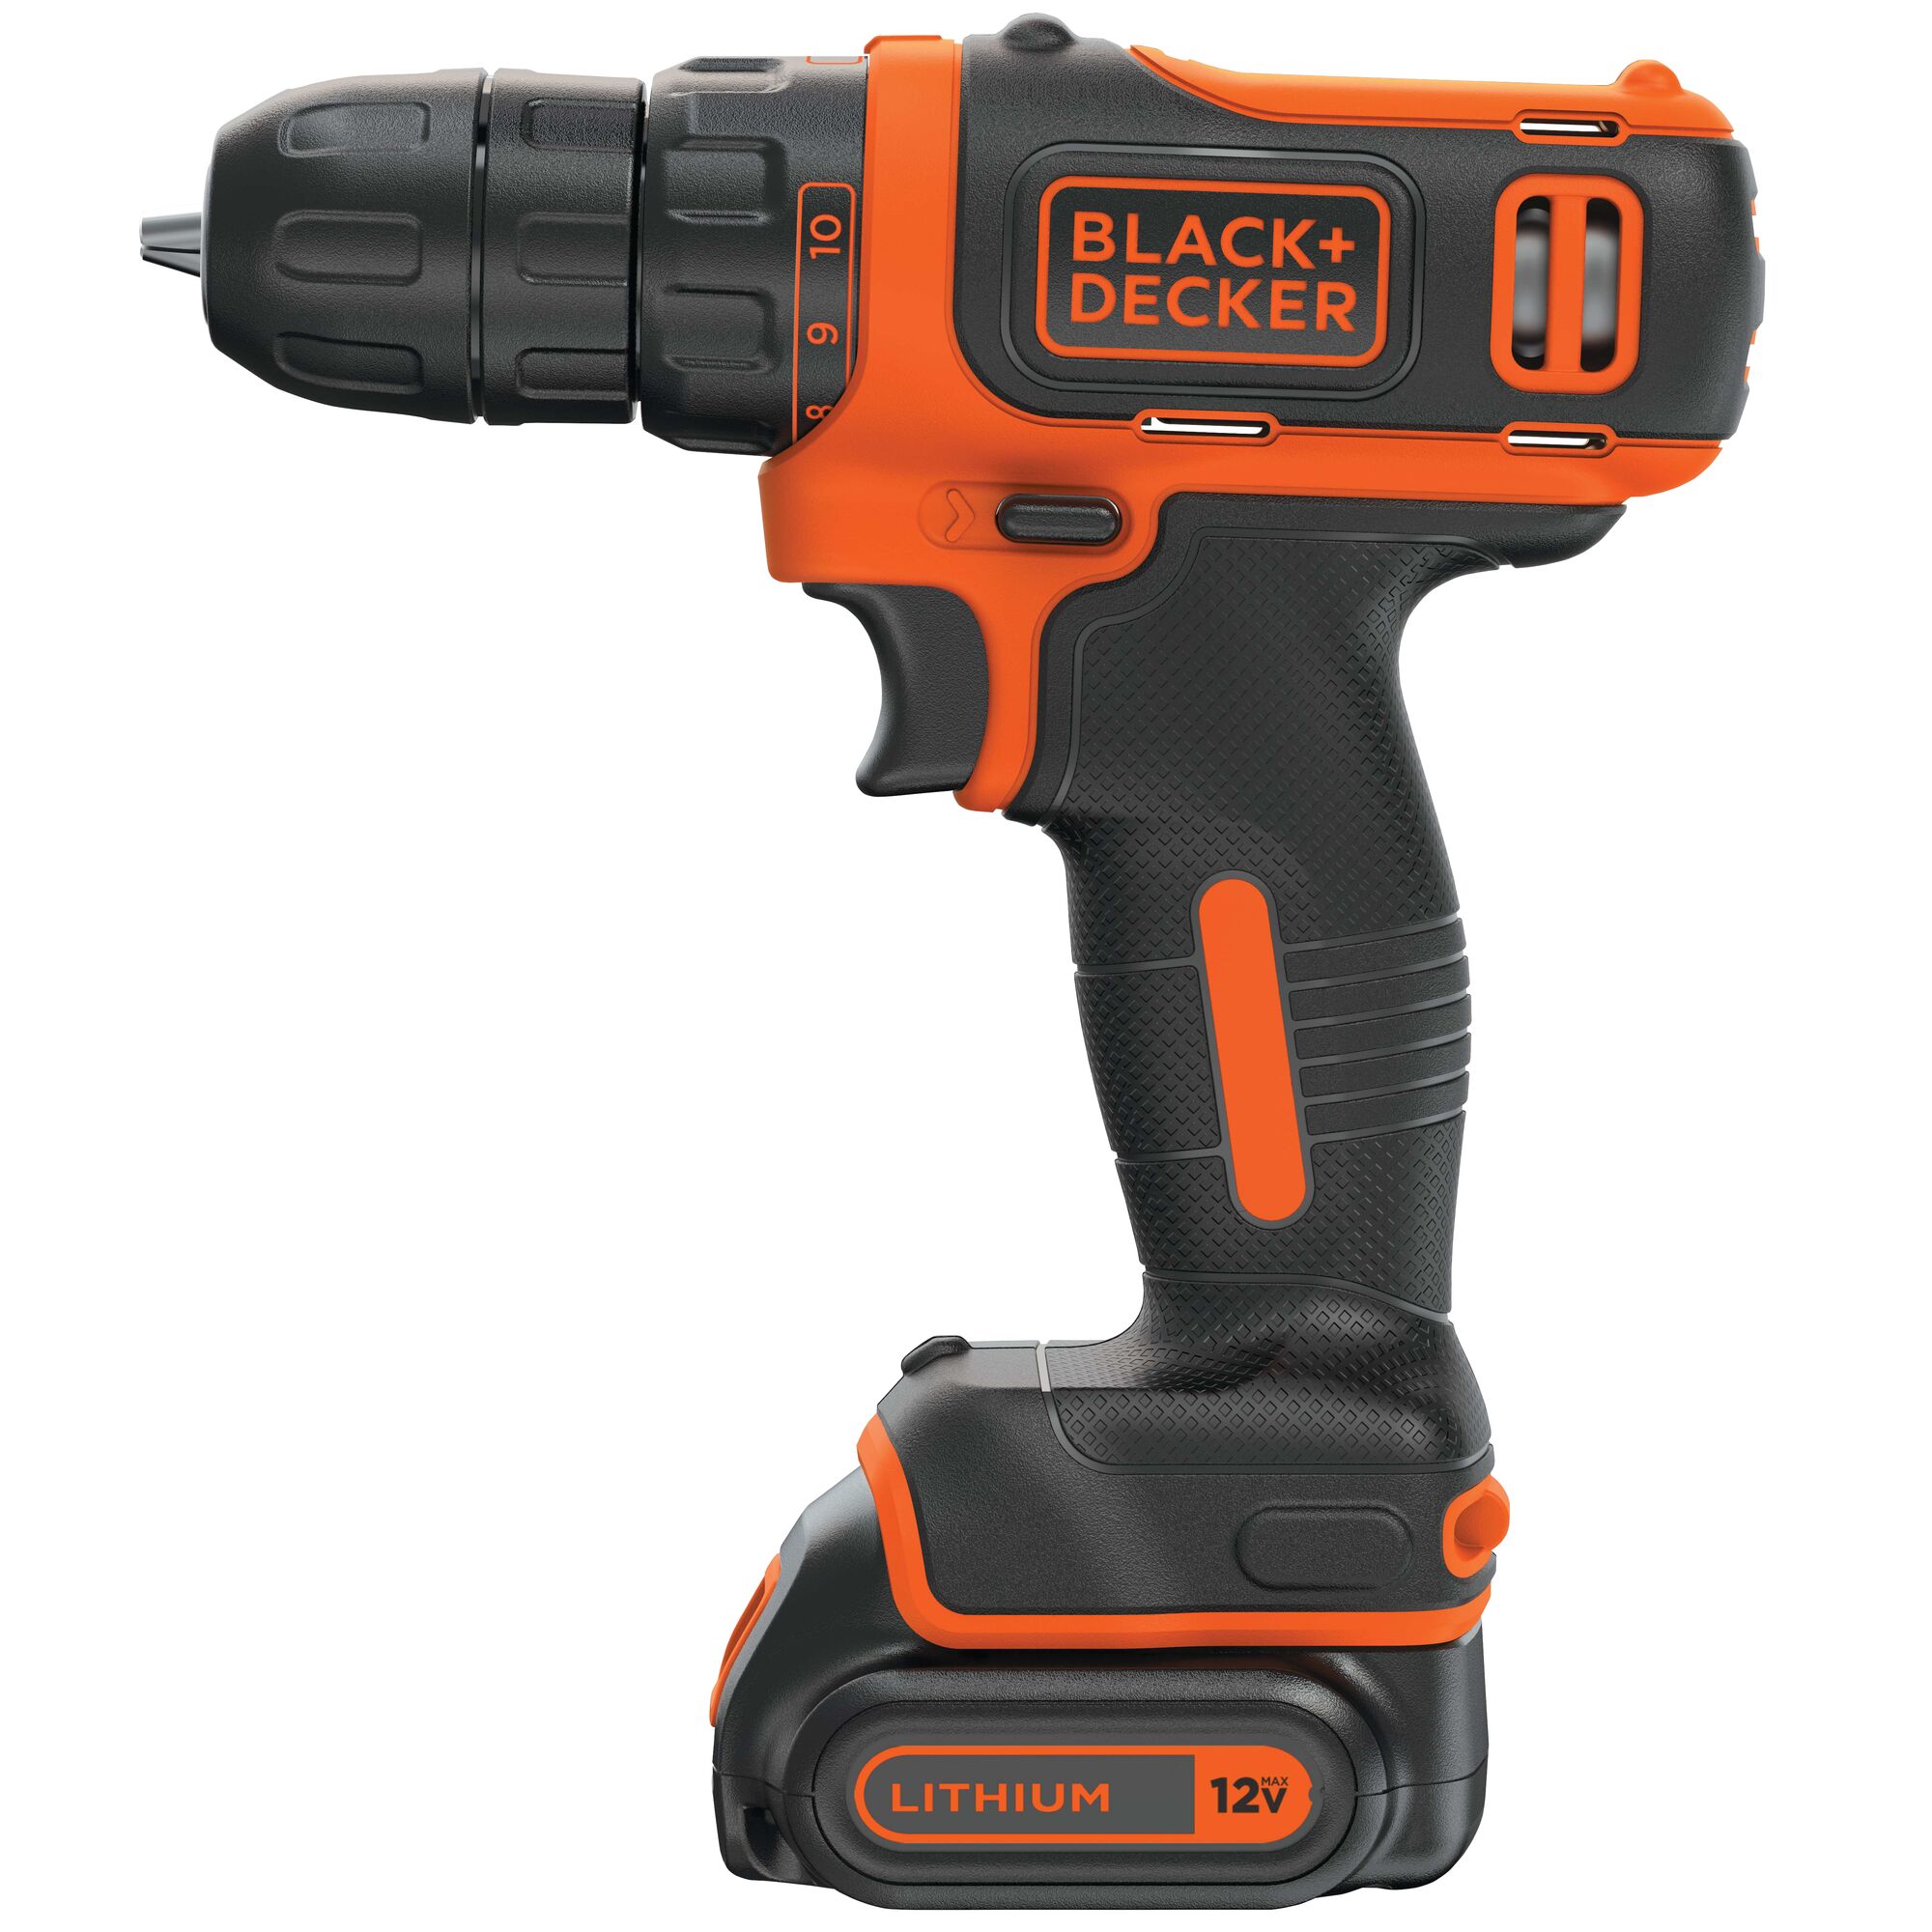 MAX Cordless Lithium Drill or Driver.